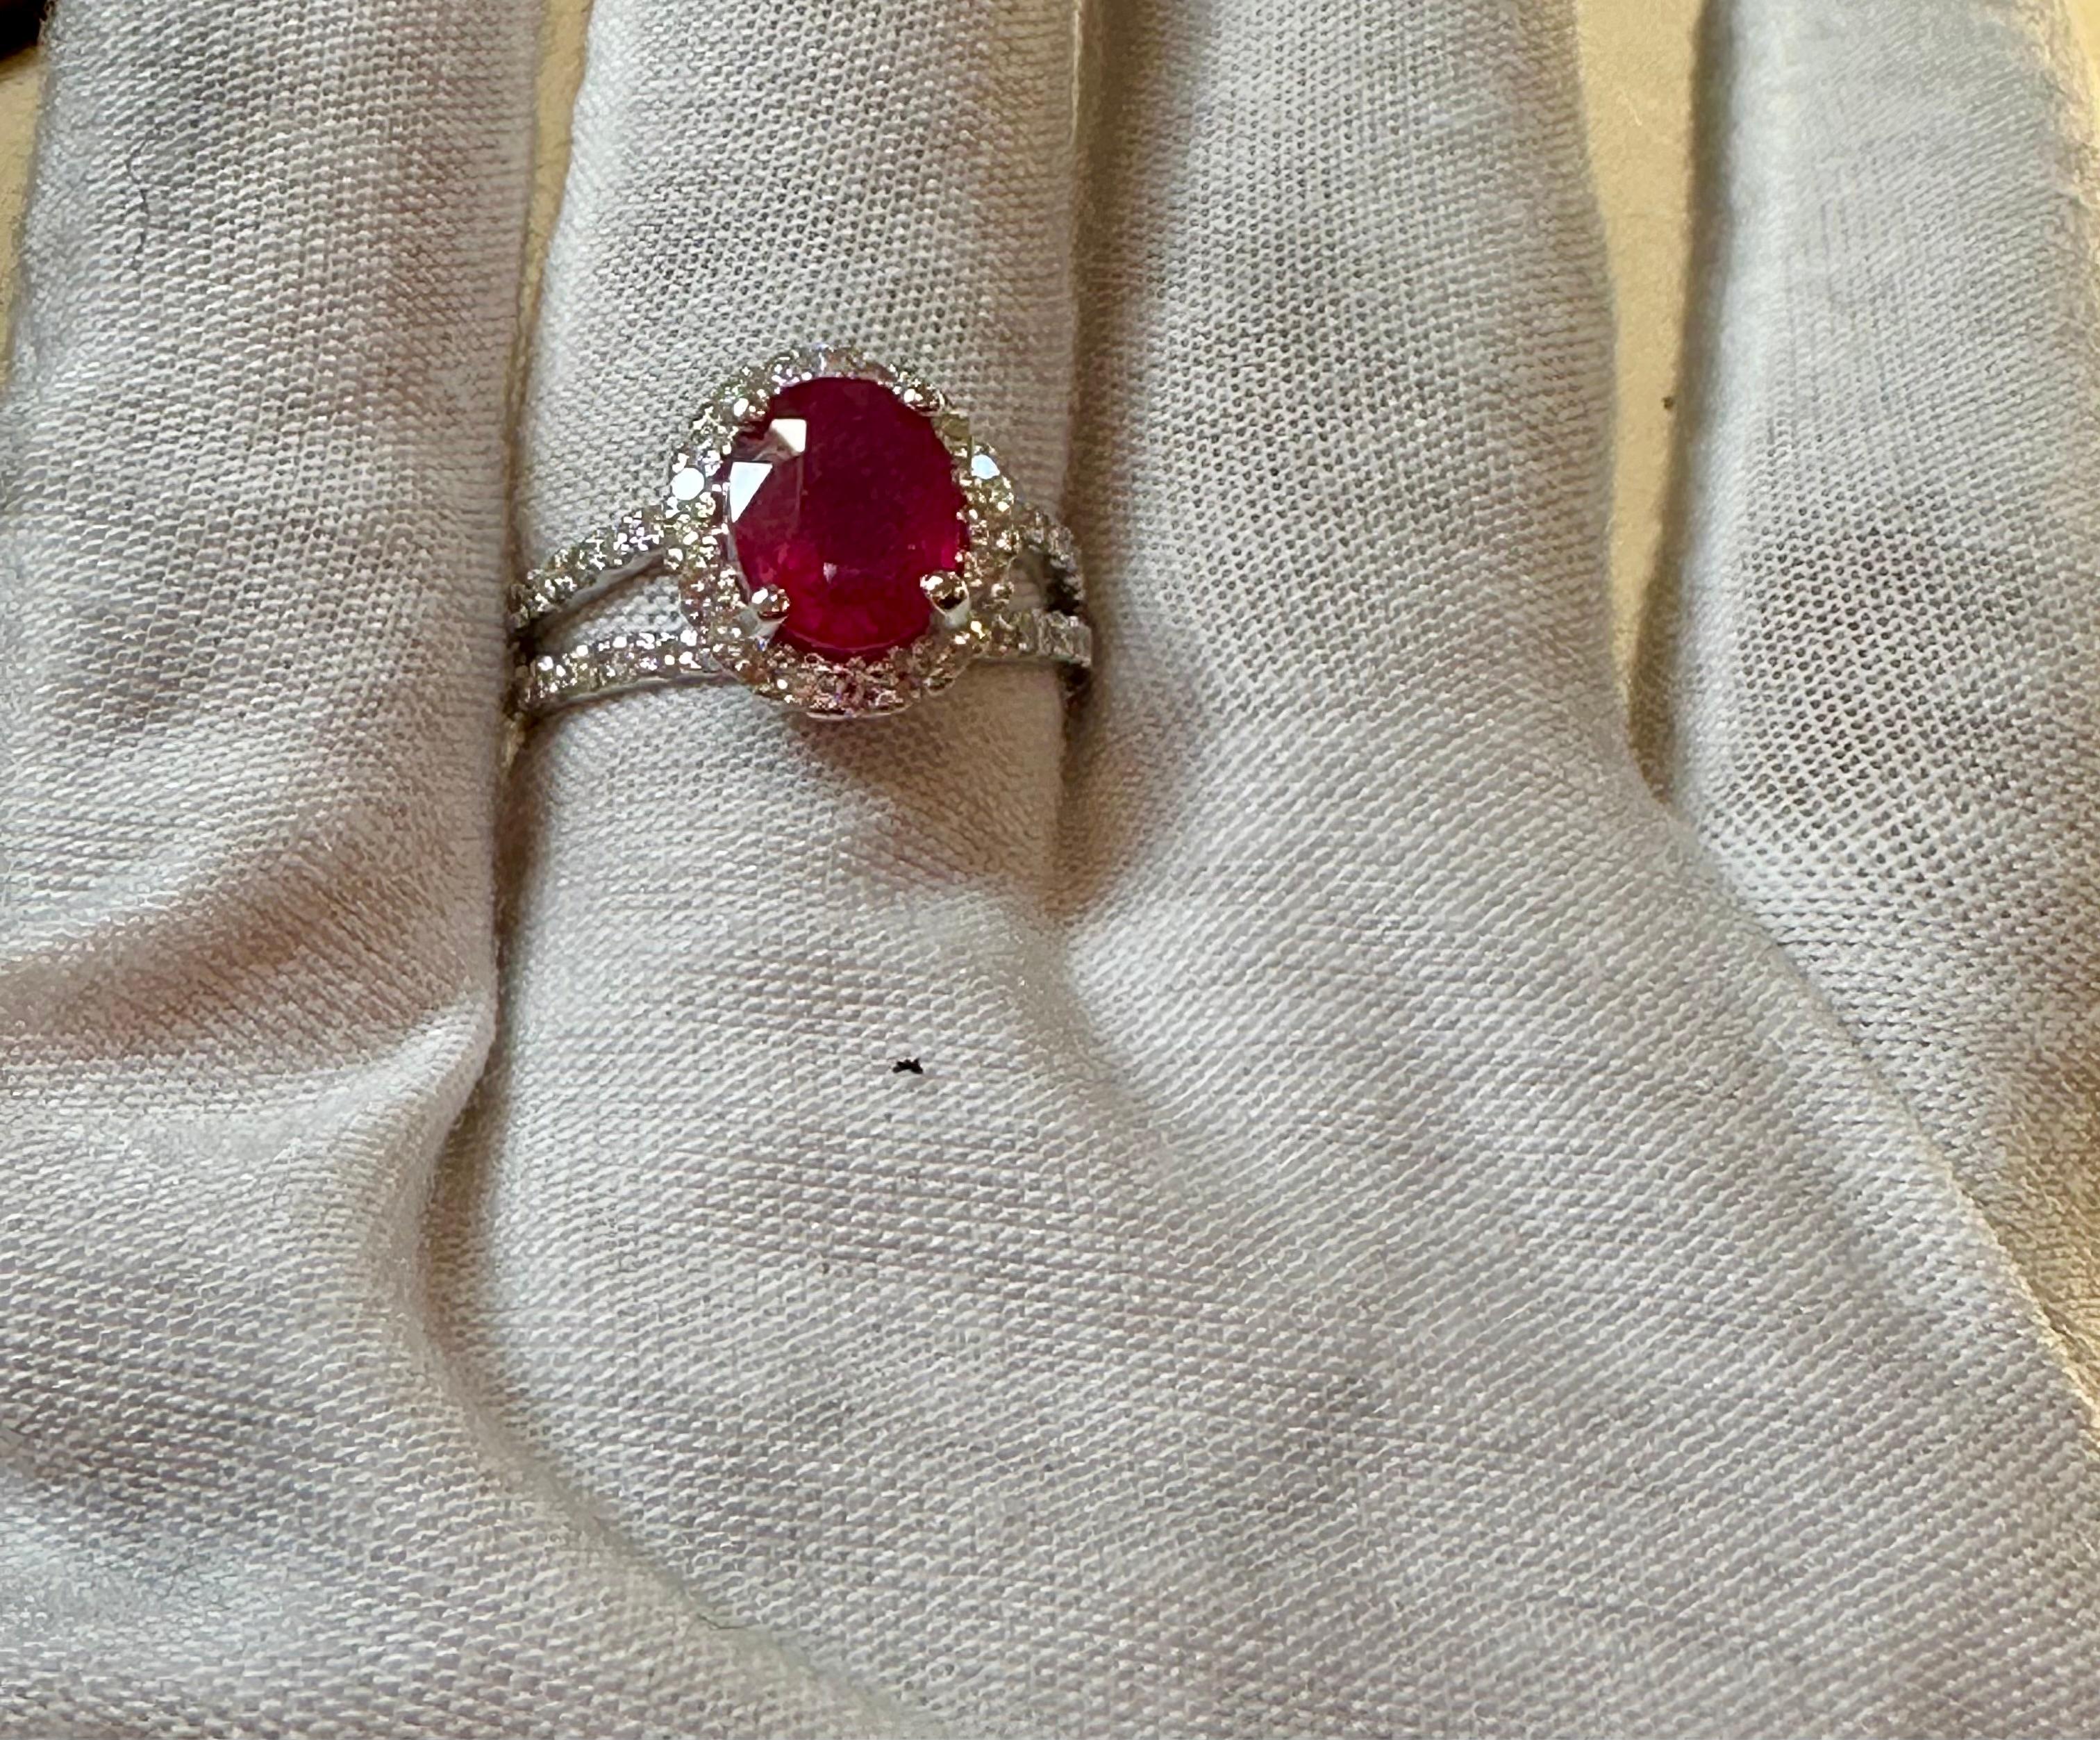 2.5 Carat Oval Treated Ruby & 2 ct Diamond Ring 14 Karat White Gold Size 7.25 In New Condition For Sale In New York, NY